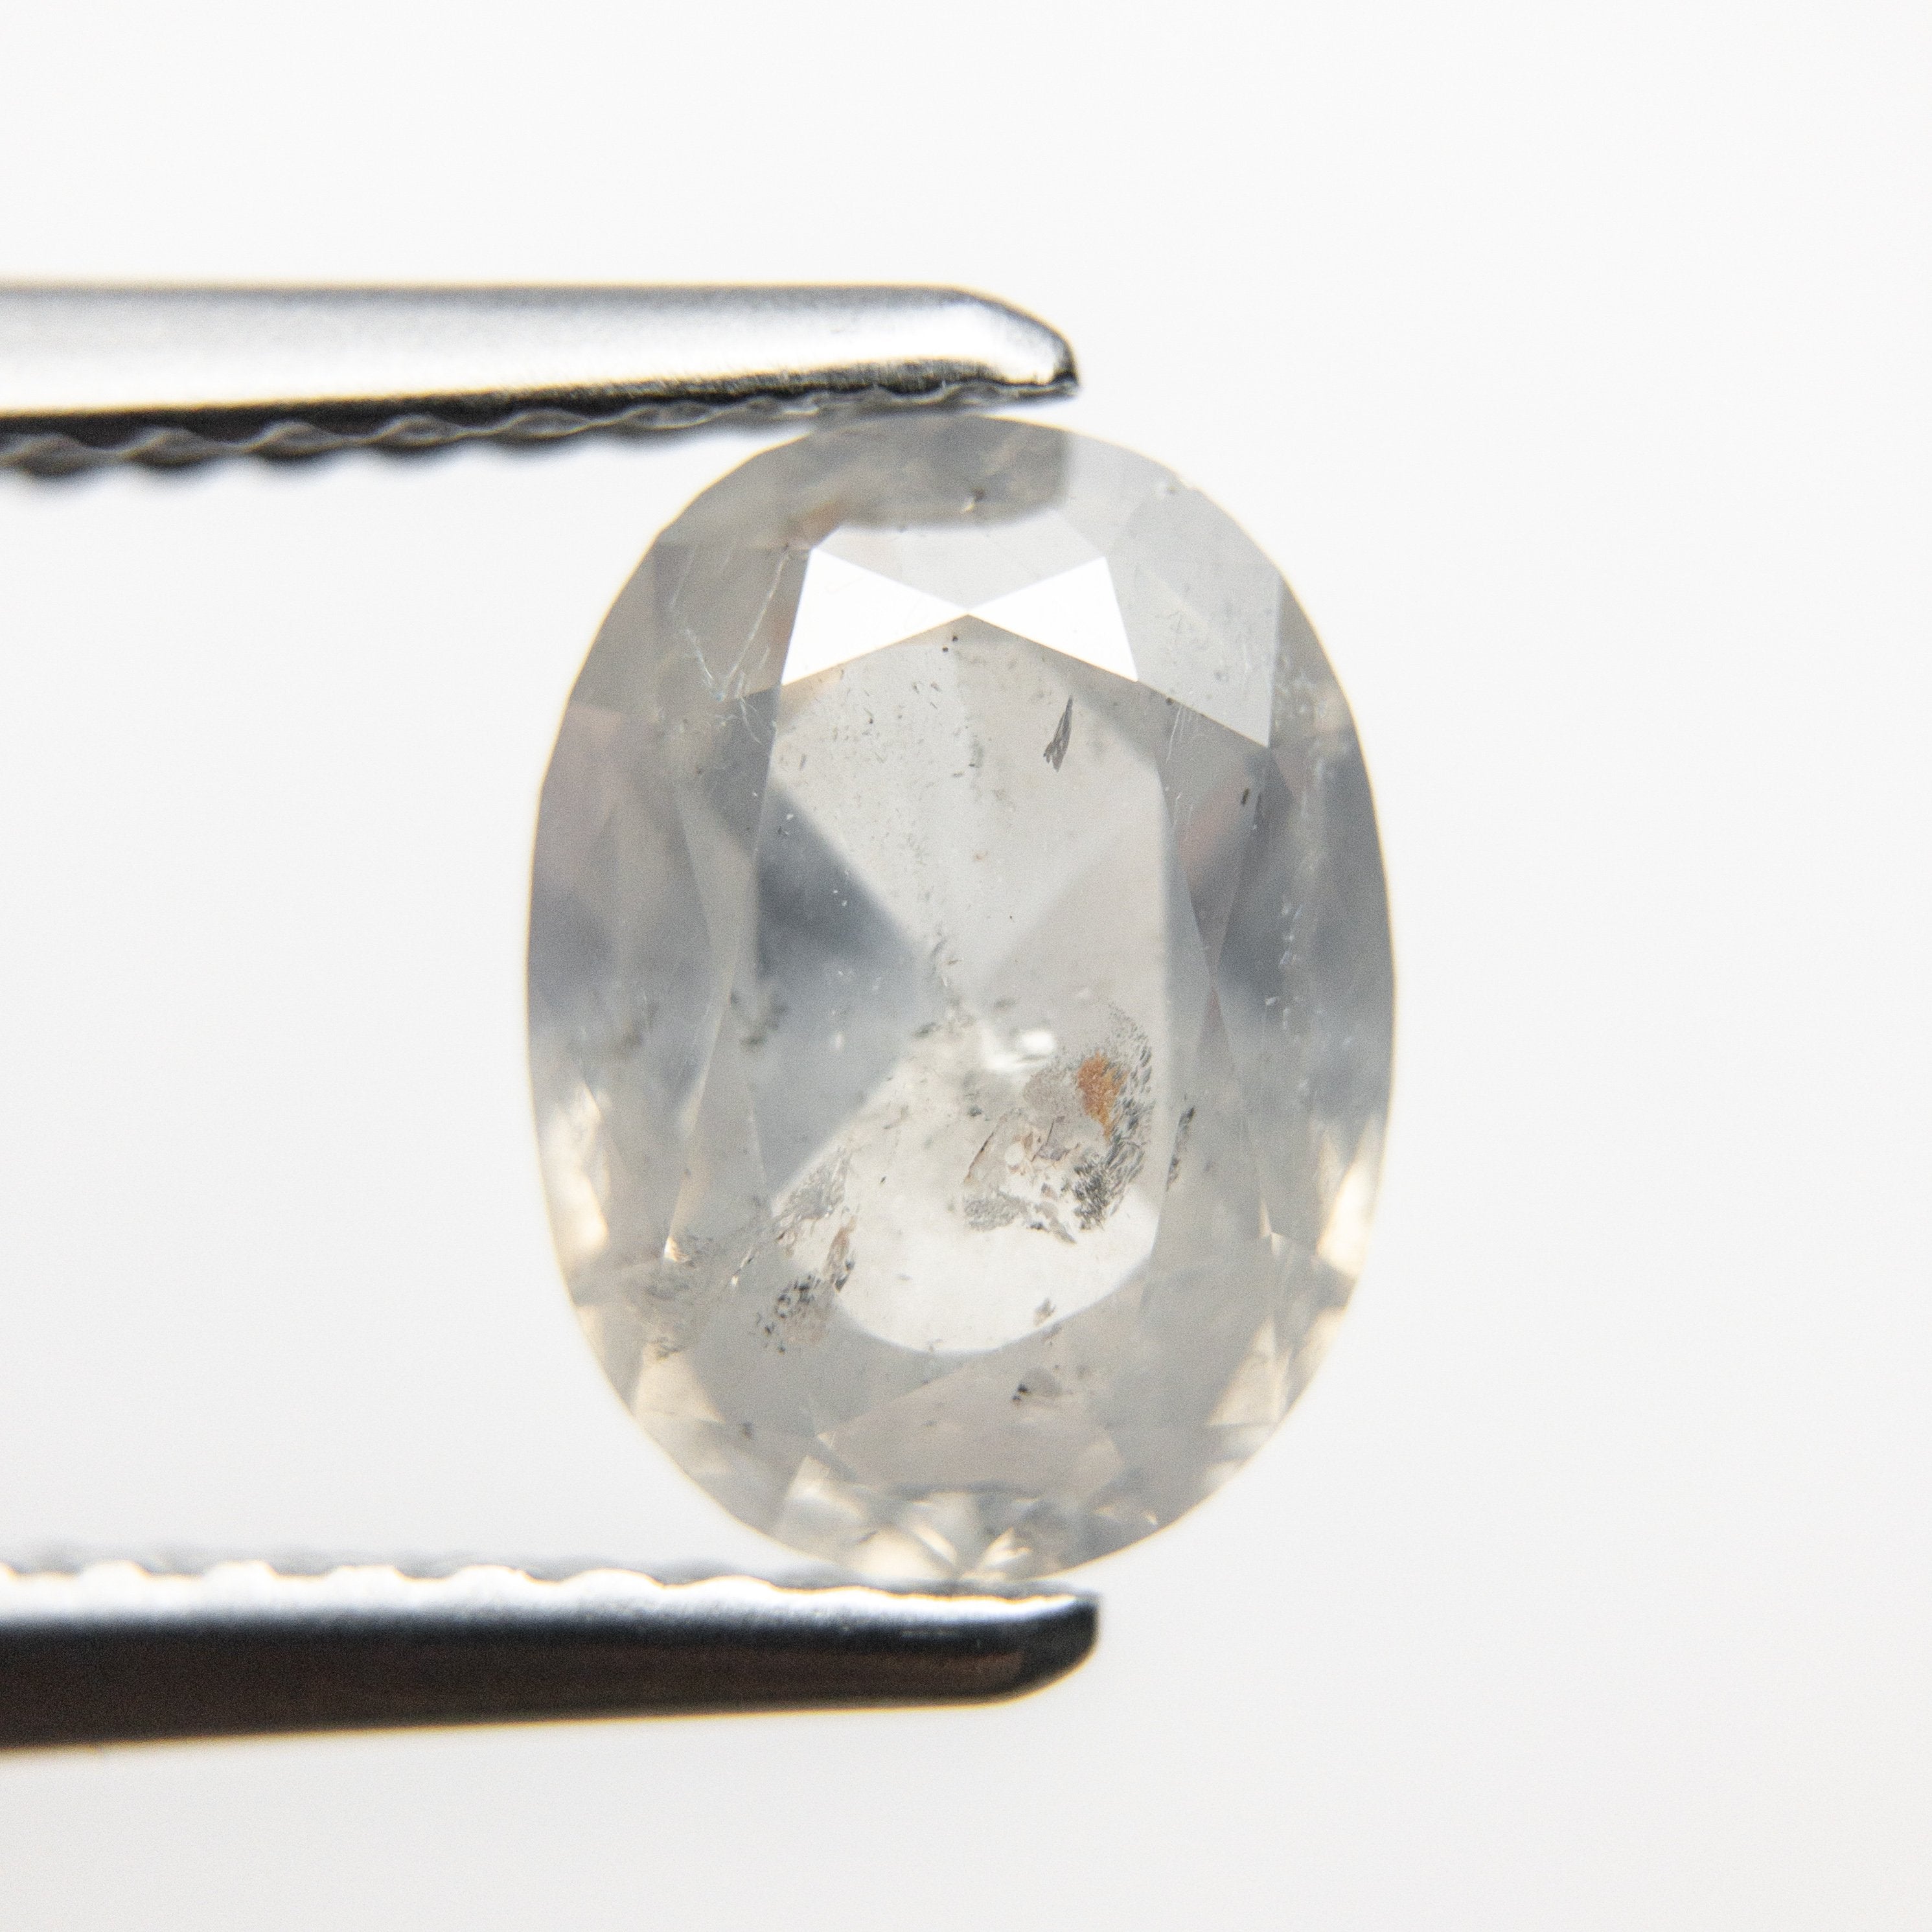 1.68ct 8.42x6.34x3.73mm Oval Double Cut 18386-22 HOLD D1437 11/18/20